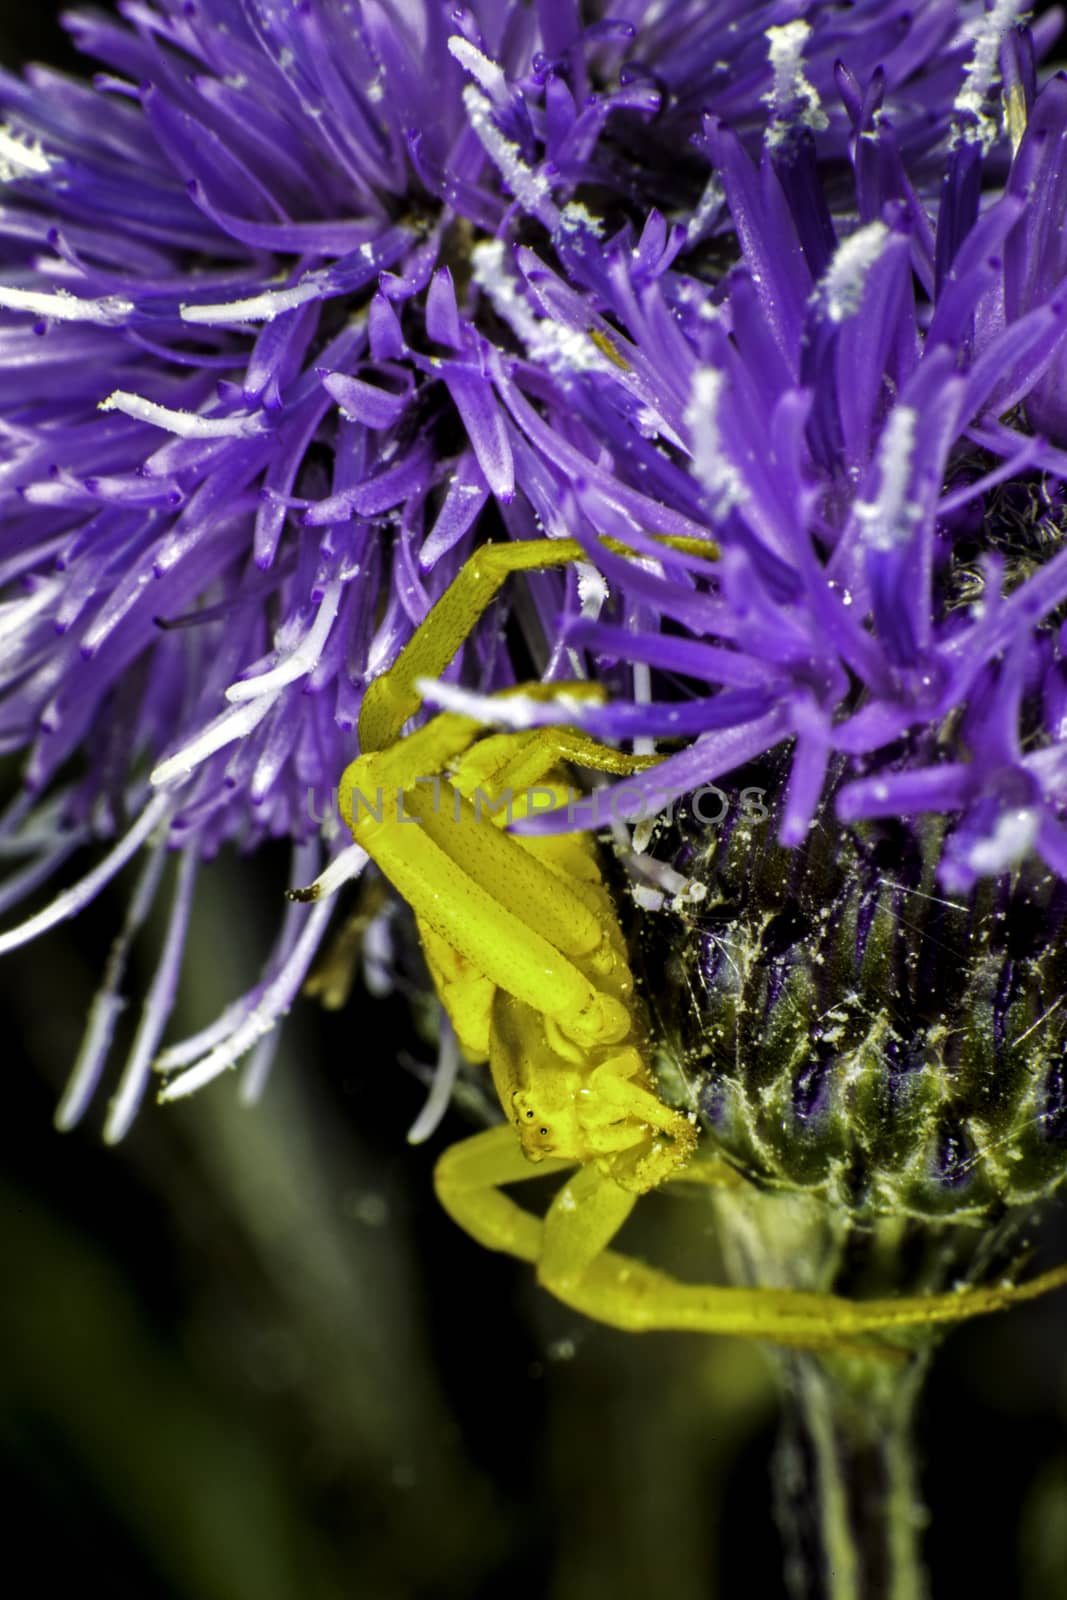 Flower Crab Spider by thomas_males